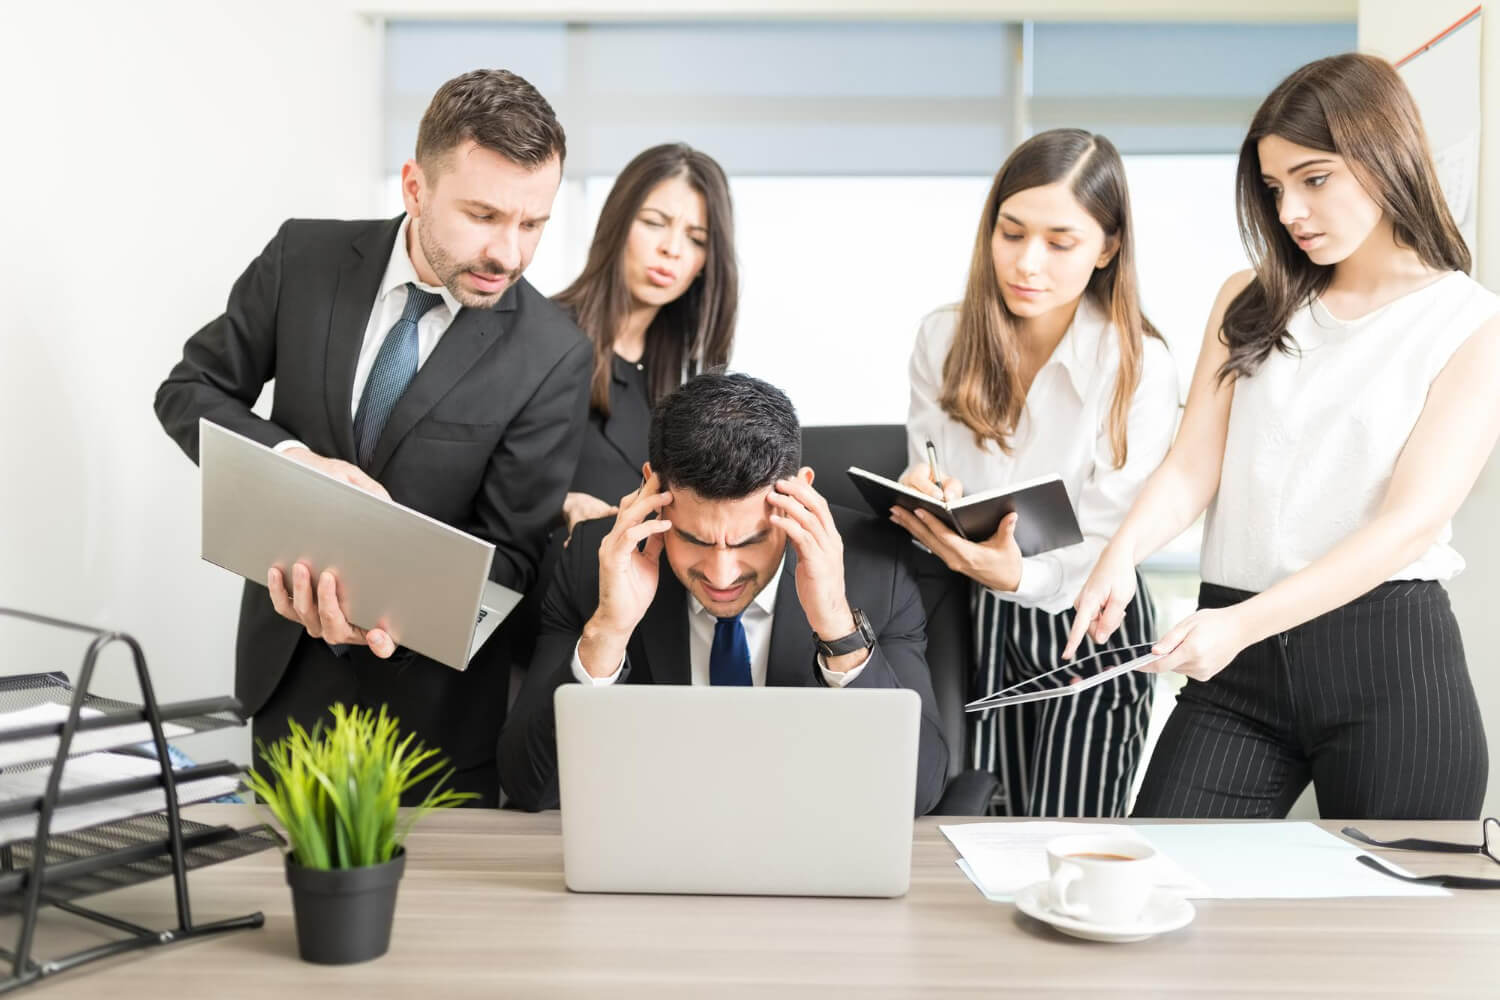 stressed-businessman-unable-cope-with-too-much-work-assigned-by-colleagues-office